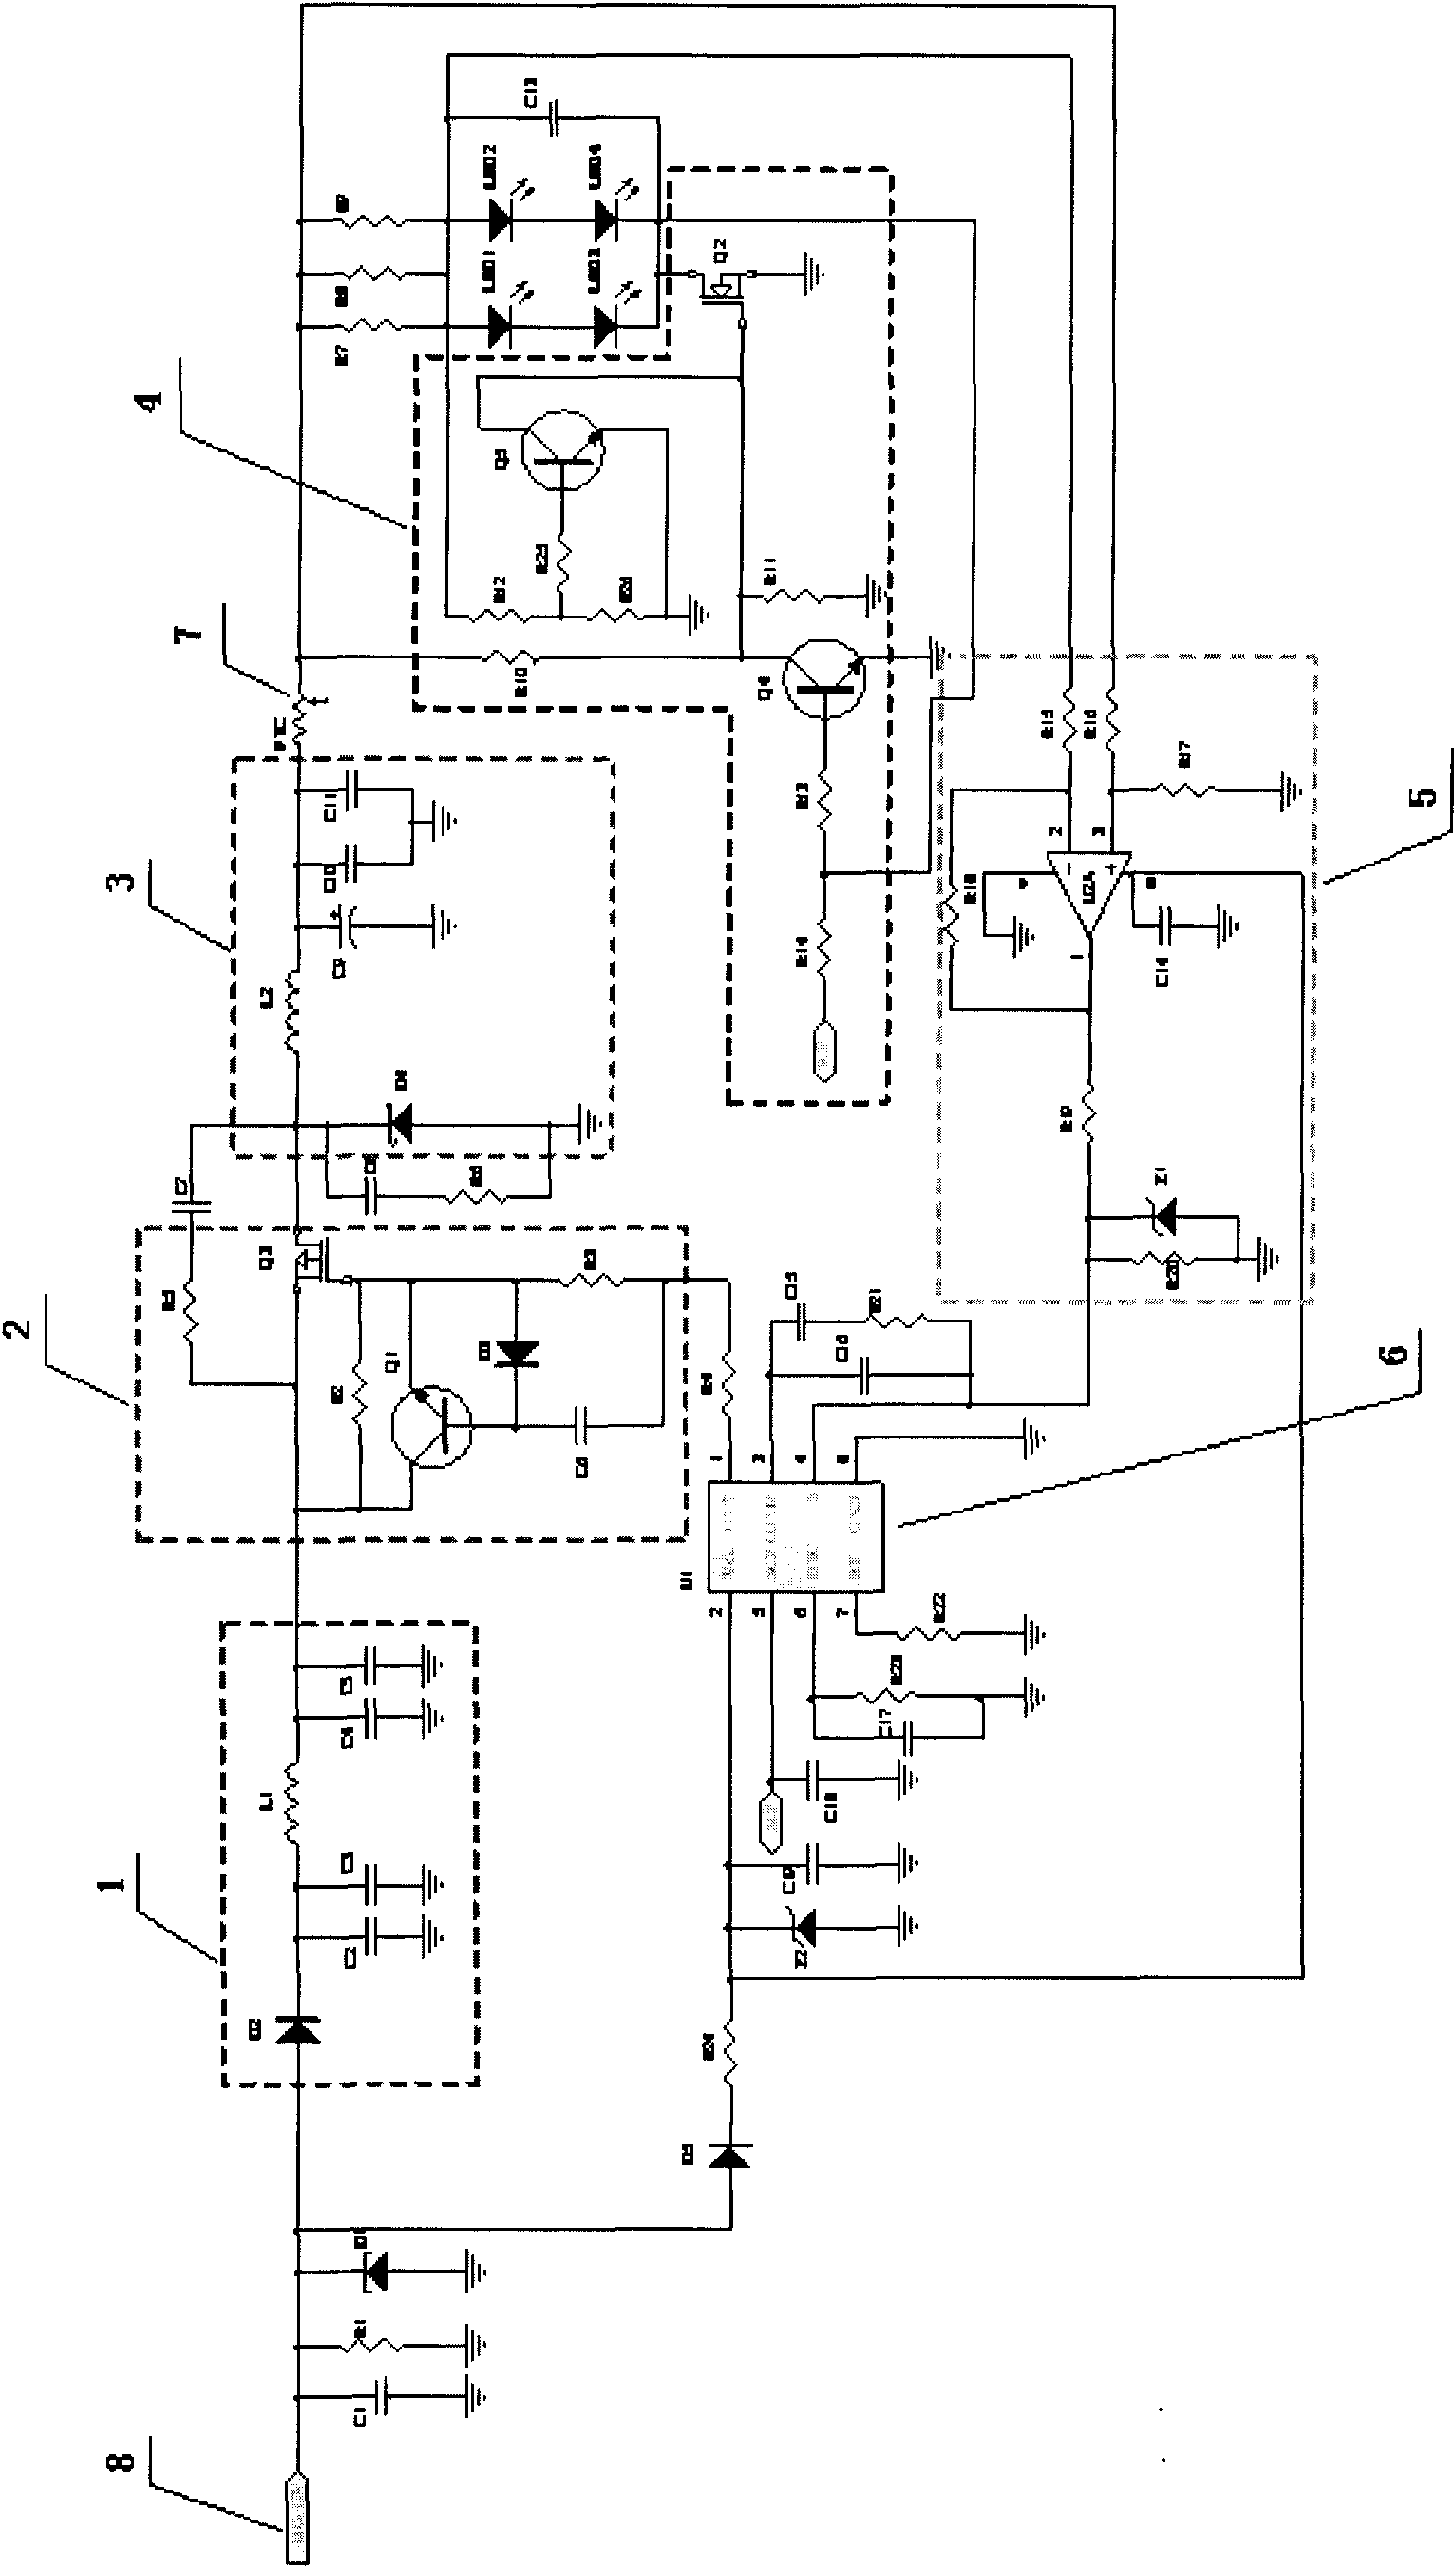 Step-down constant current LED drive circuit for automobile lighting